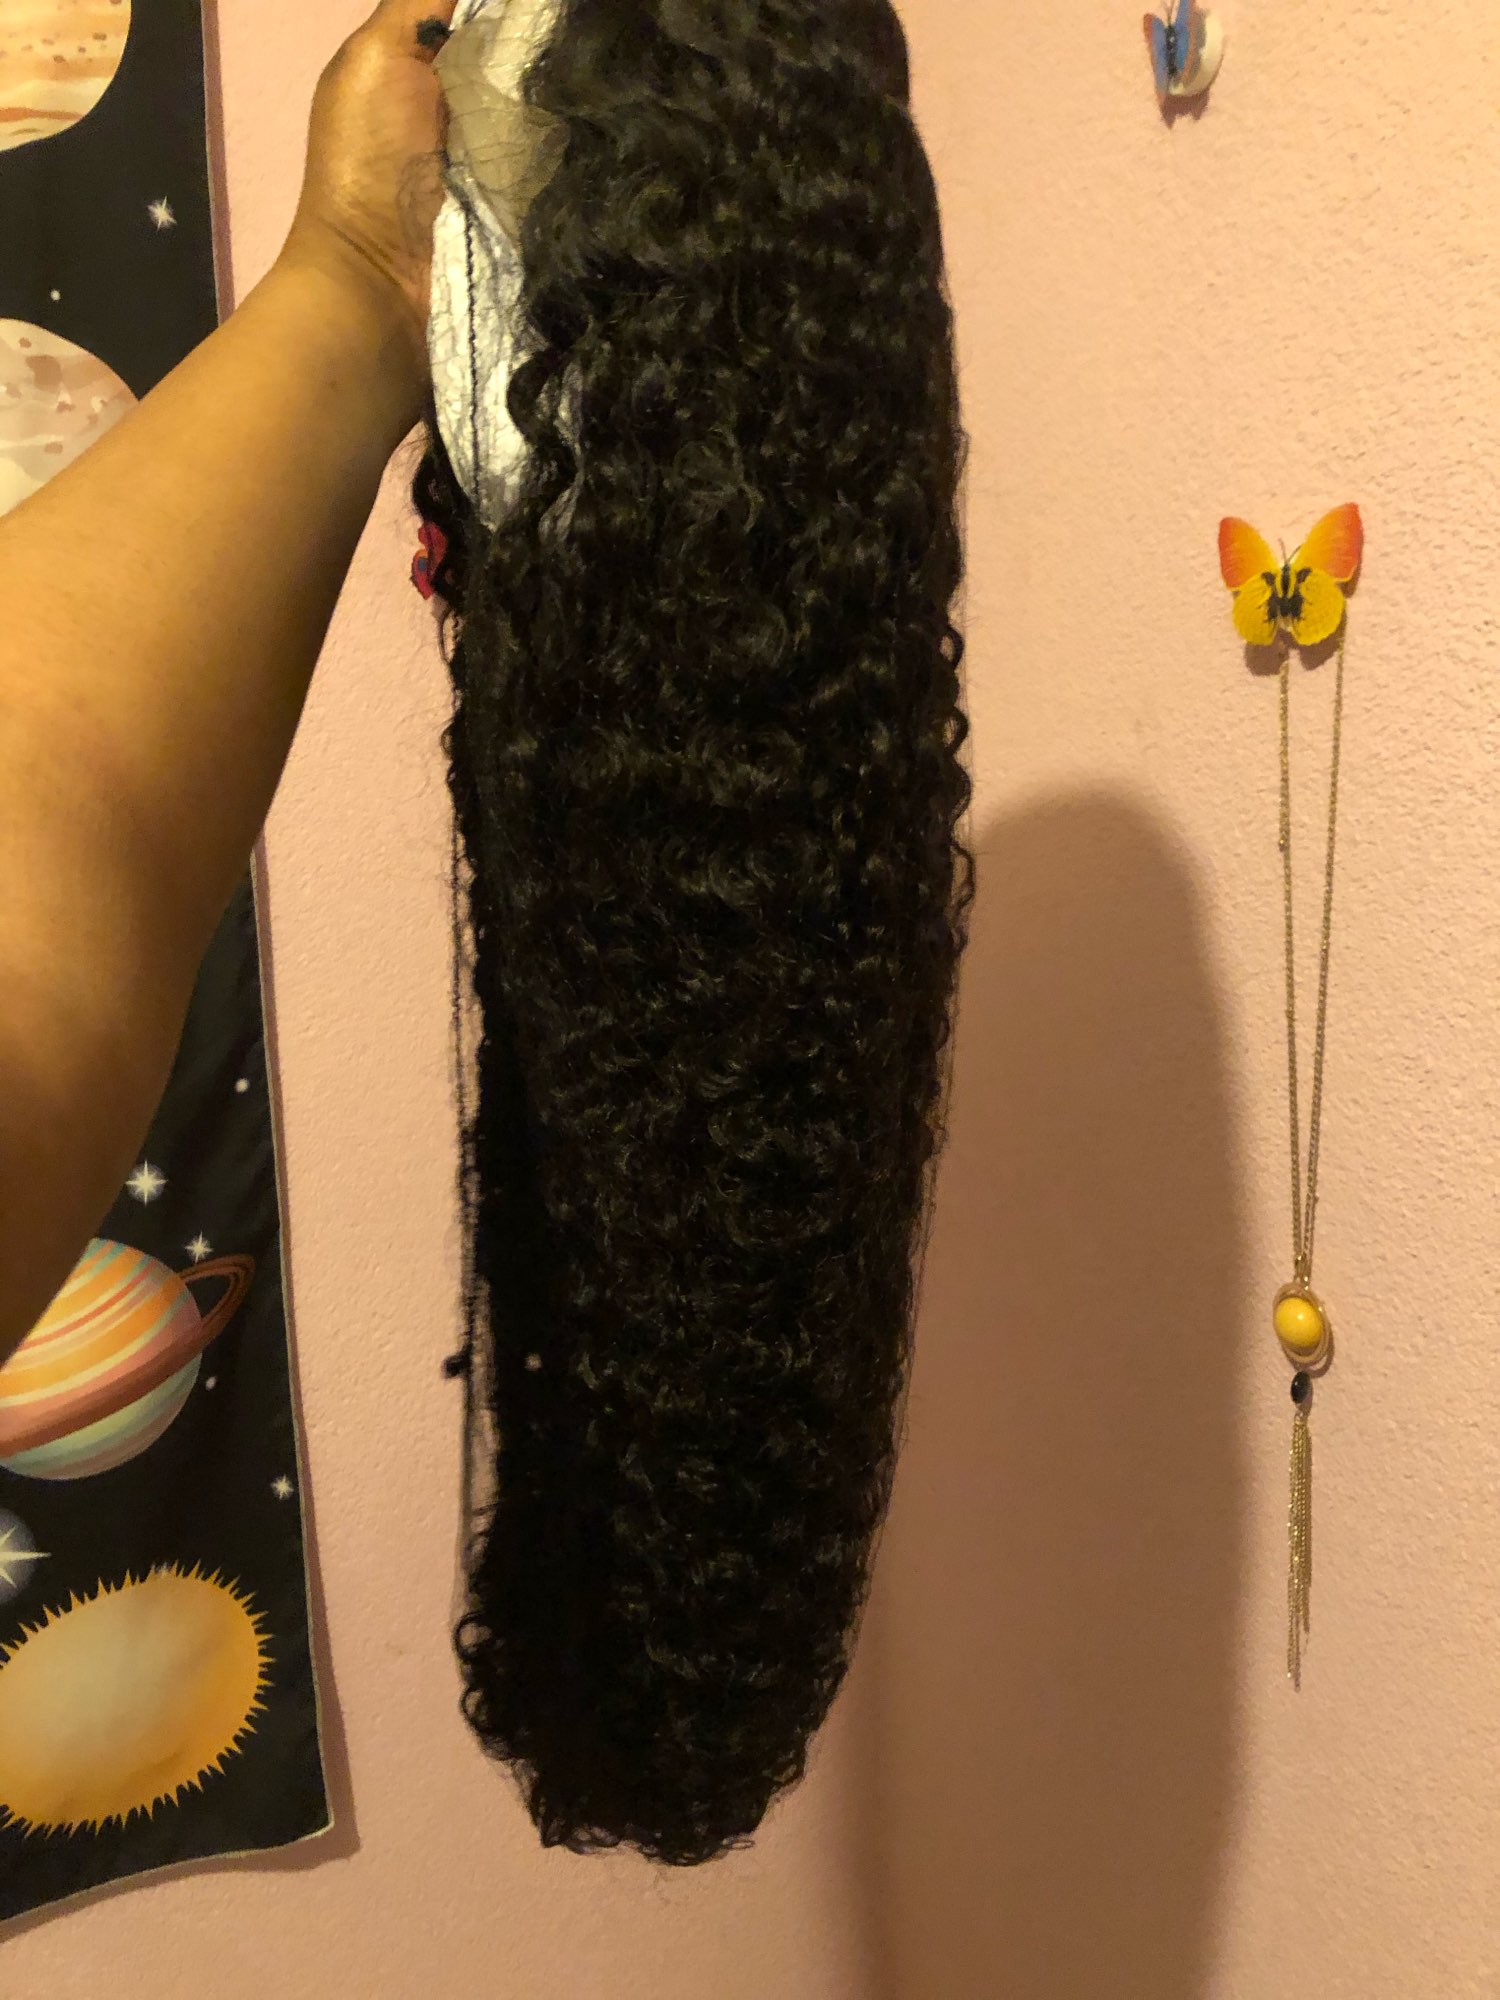 This hair is absolutely amazing! The length i